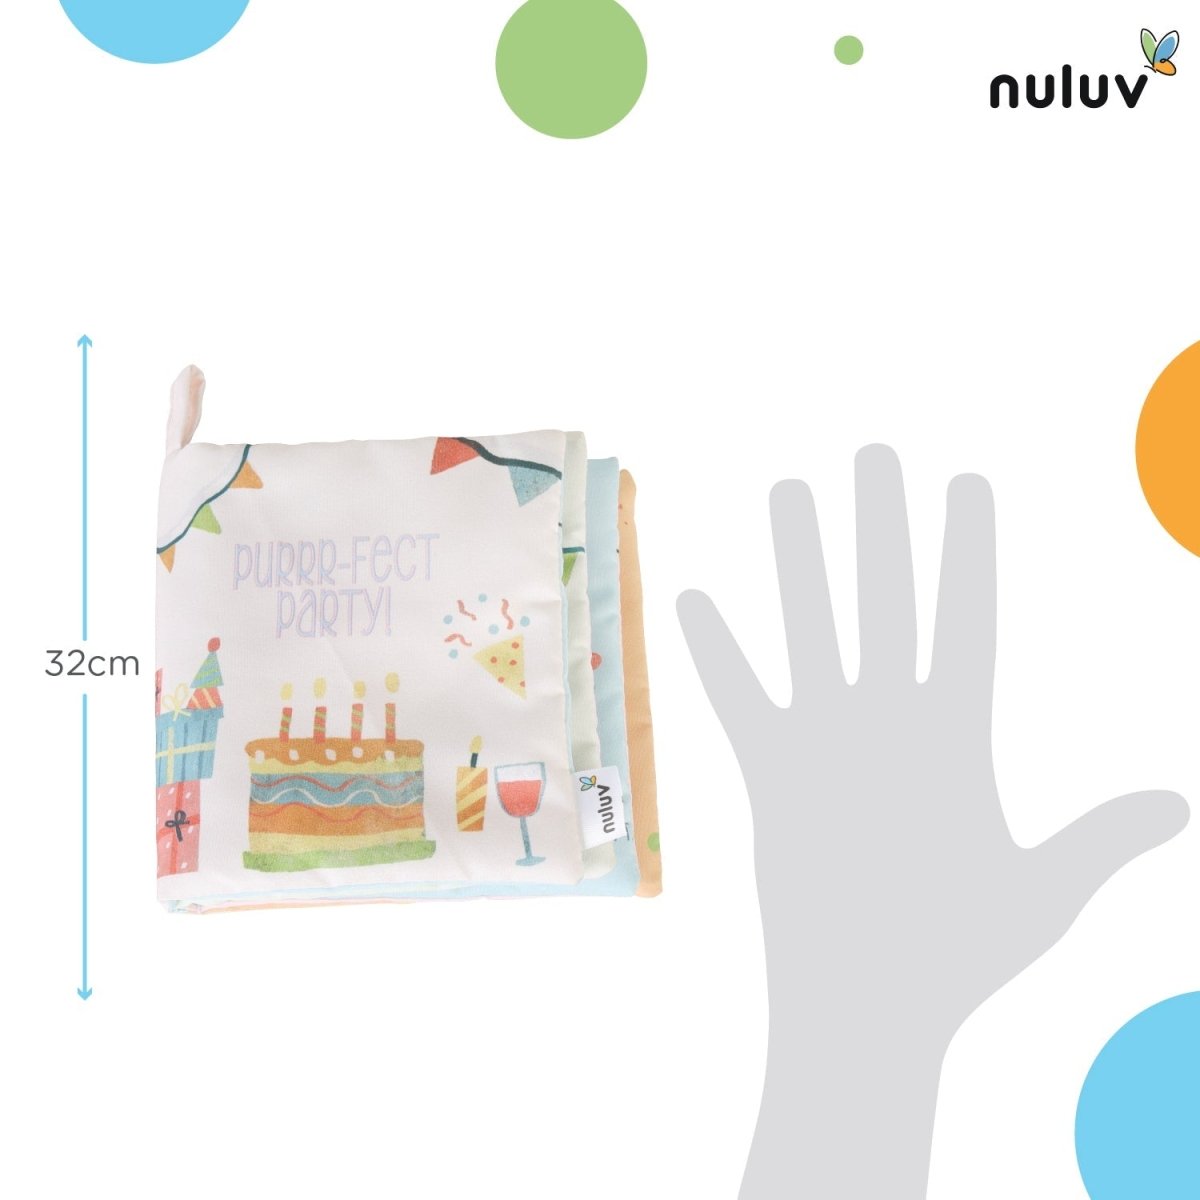 Nuluv Perfect Party Playbook - NU-I-0010